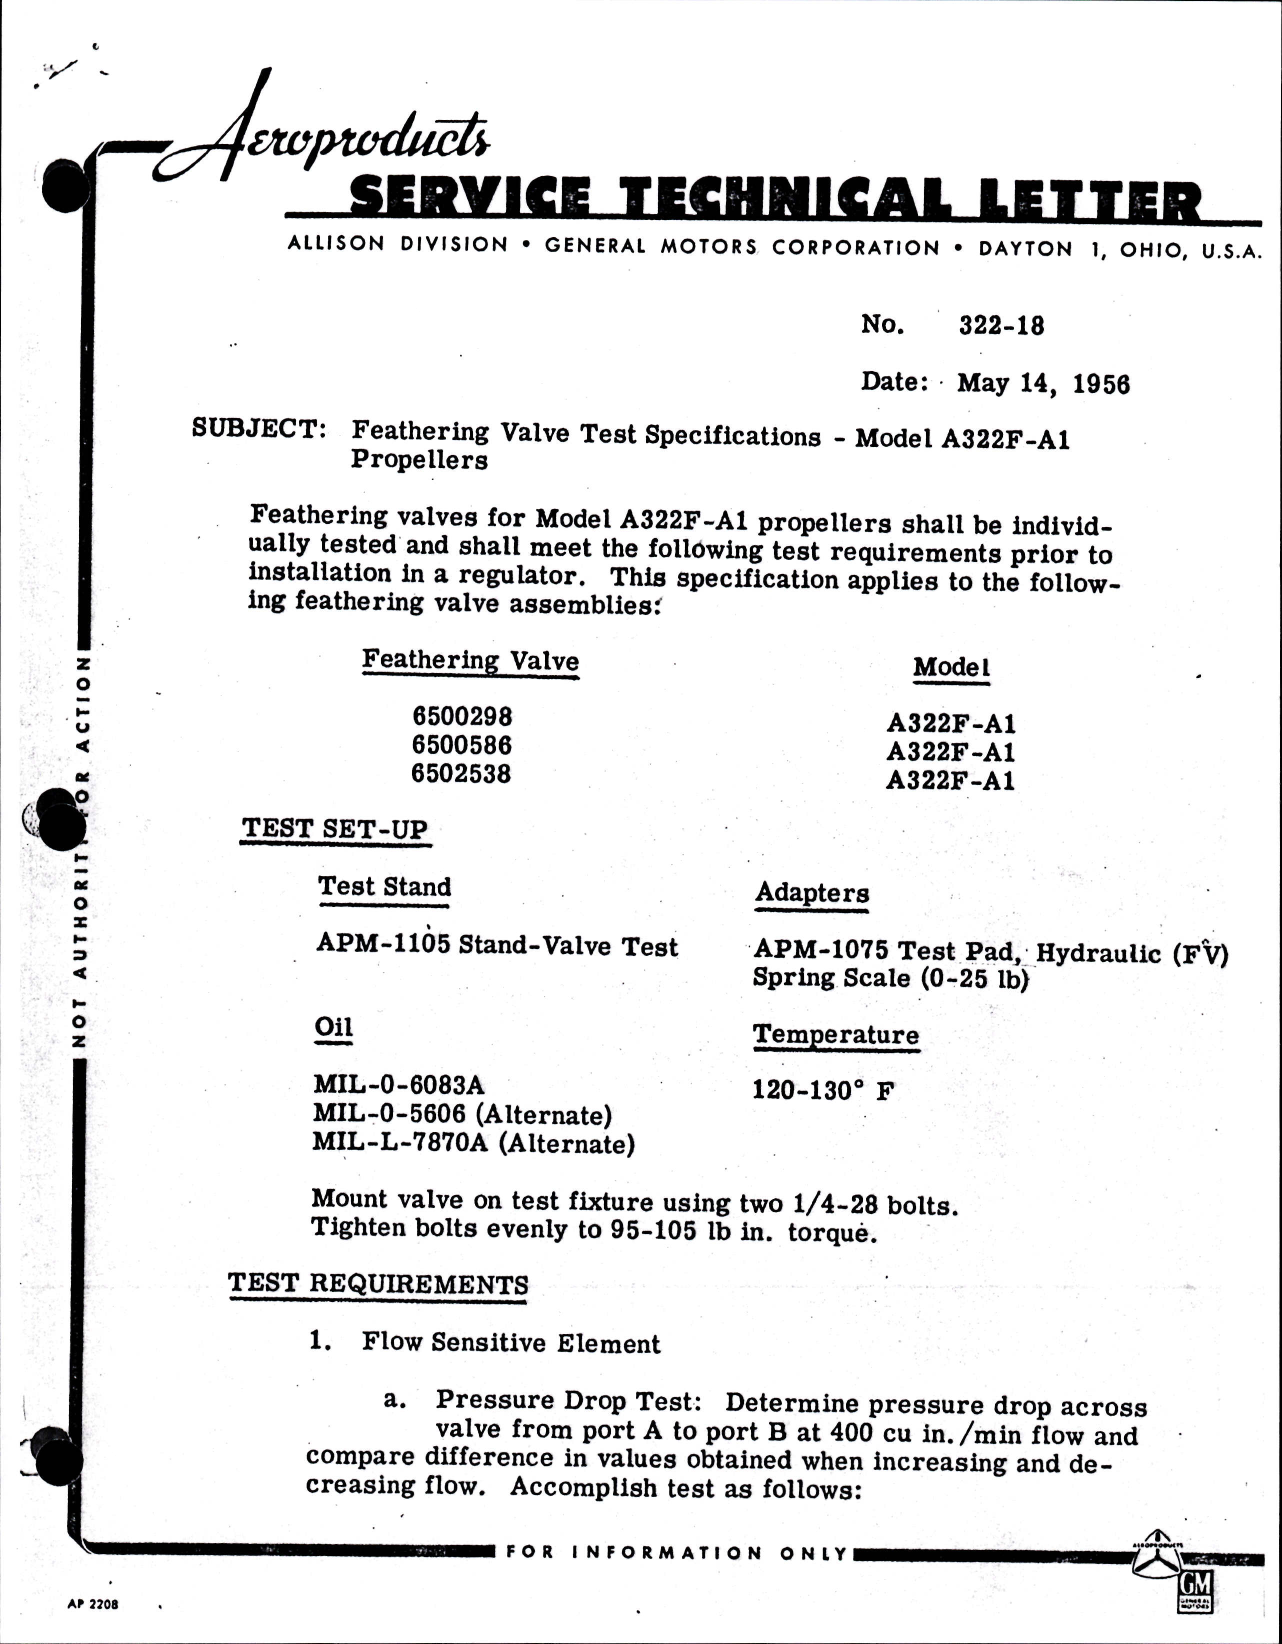 Sample page 1 from AirCorps Library document: Feathering Valve Test Specifications for Model A322F-A1 Propellers